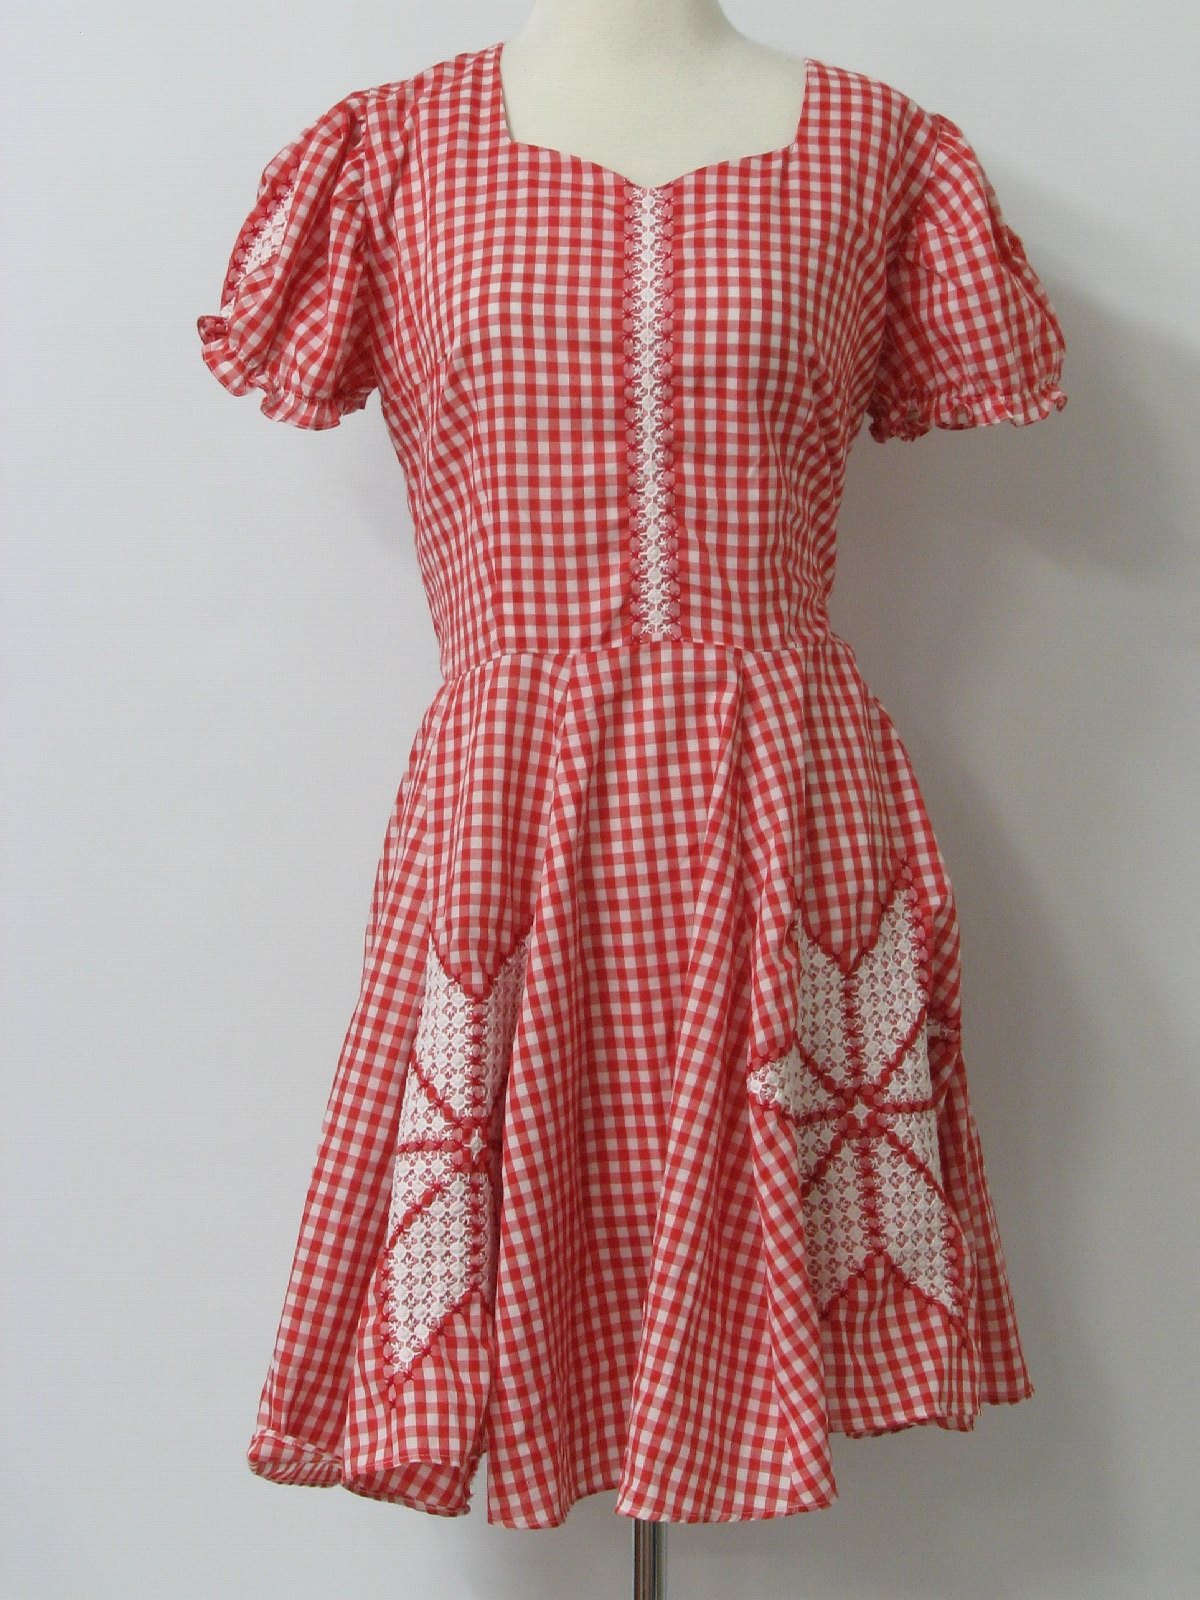 Retro Sixties Dress: 60s -Missing Label- Womens red and white gingham ...